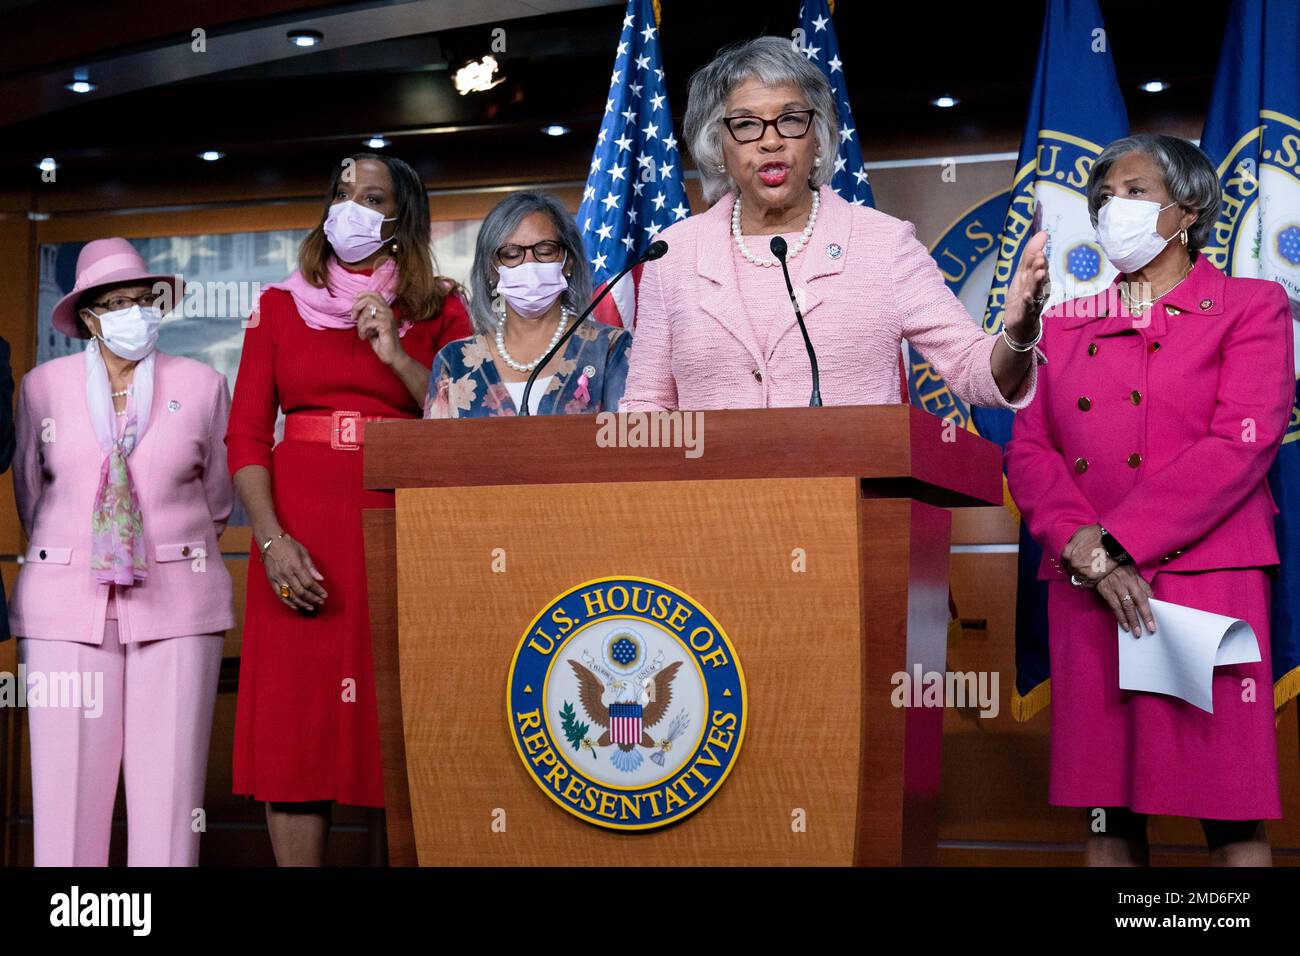 Rep. Joyce Beatty, D-Ohio, Chairwoman of the Congressional Black Caucus, accompanied by other caucus members, speaks during a news conference, on the inclusion of Black policy priorities in the "Build Back Better" agenda and the bipartisan infrastructure bill, on Capitol Hill in Washington, Wednesday, Oct. 27, 2021. (AP Photo/Jose Luis Magana) Stock Photo